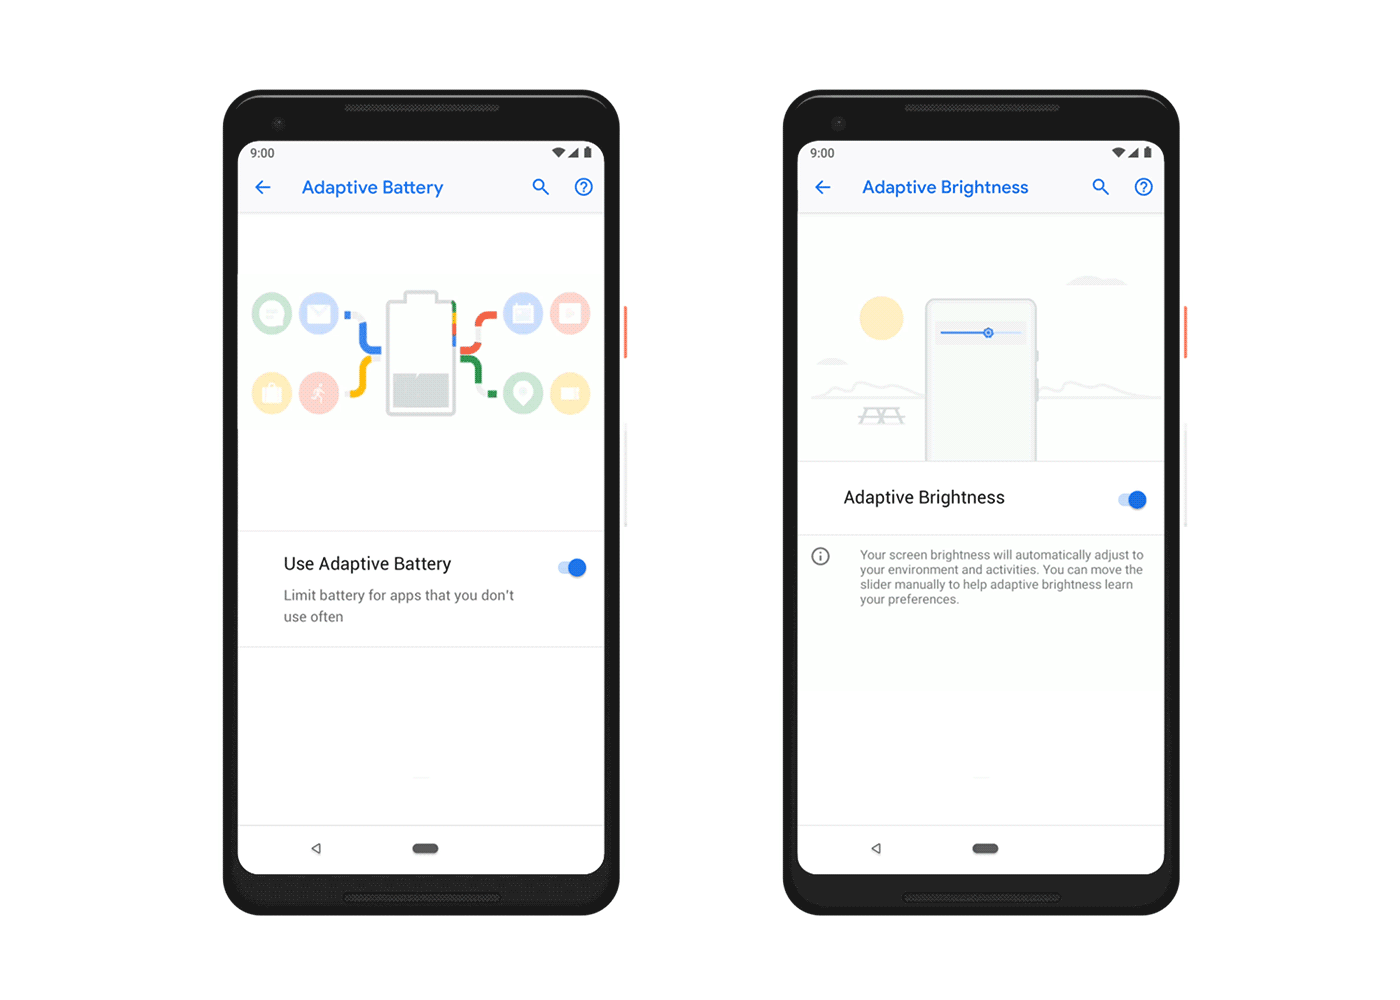 Android 9 Pie: Powered by AI for a smarter, simpler experience that adapts to you